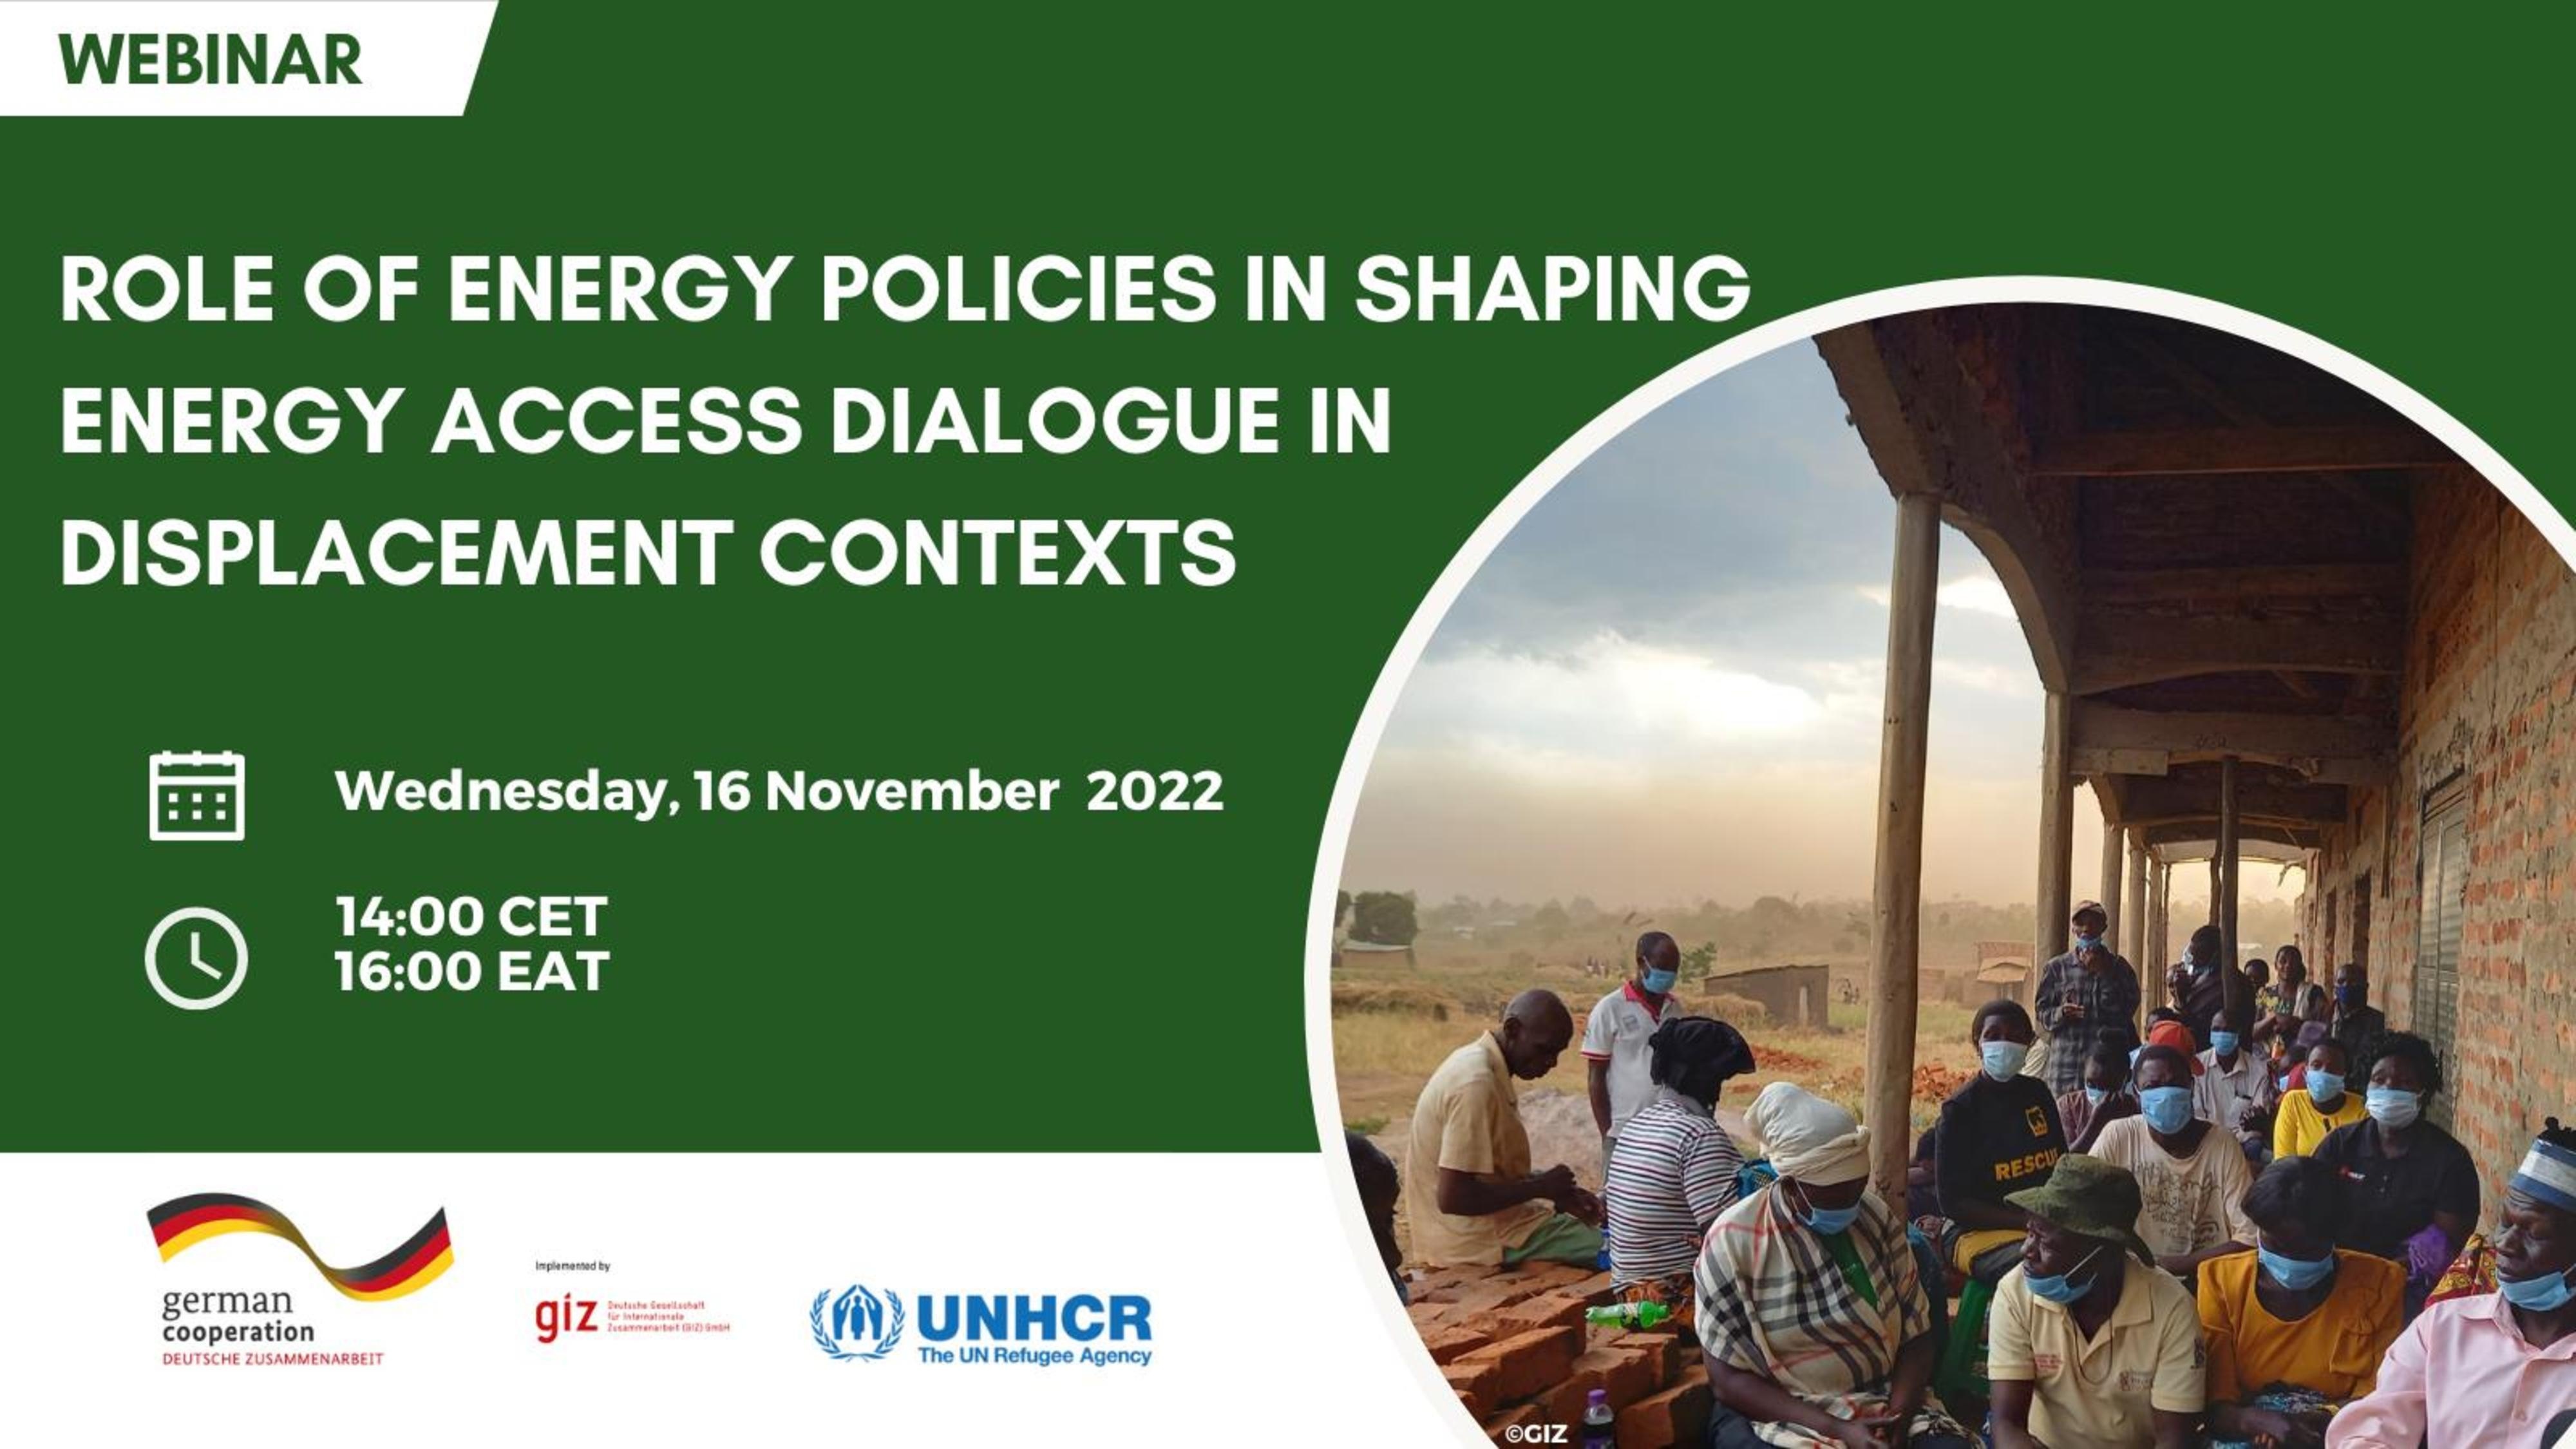 Presentation Slides: Webinar on Role of Energy Policies in Shaping Energy Access